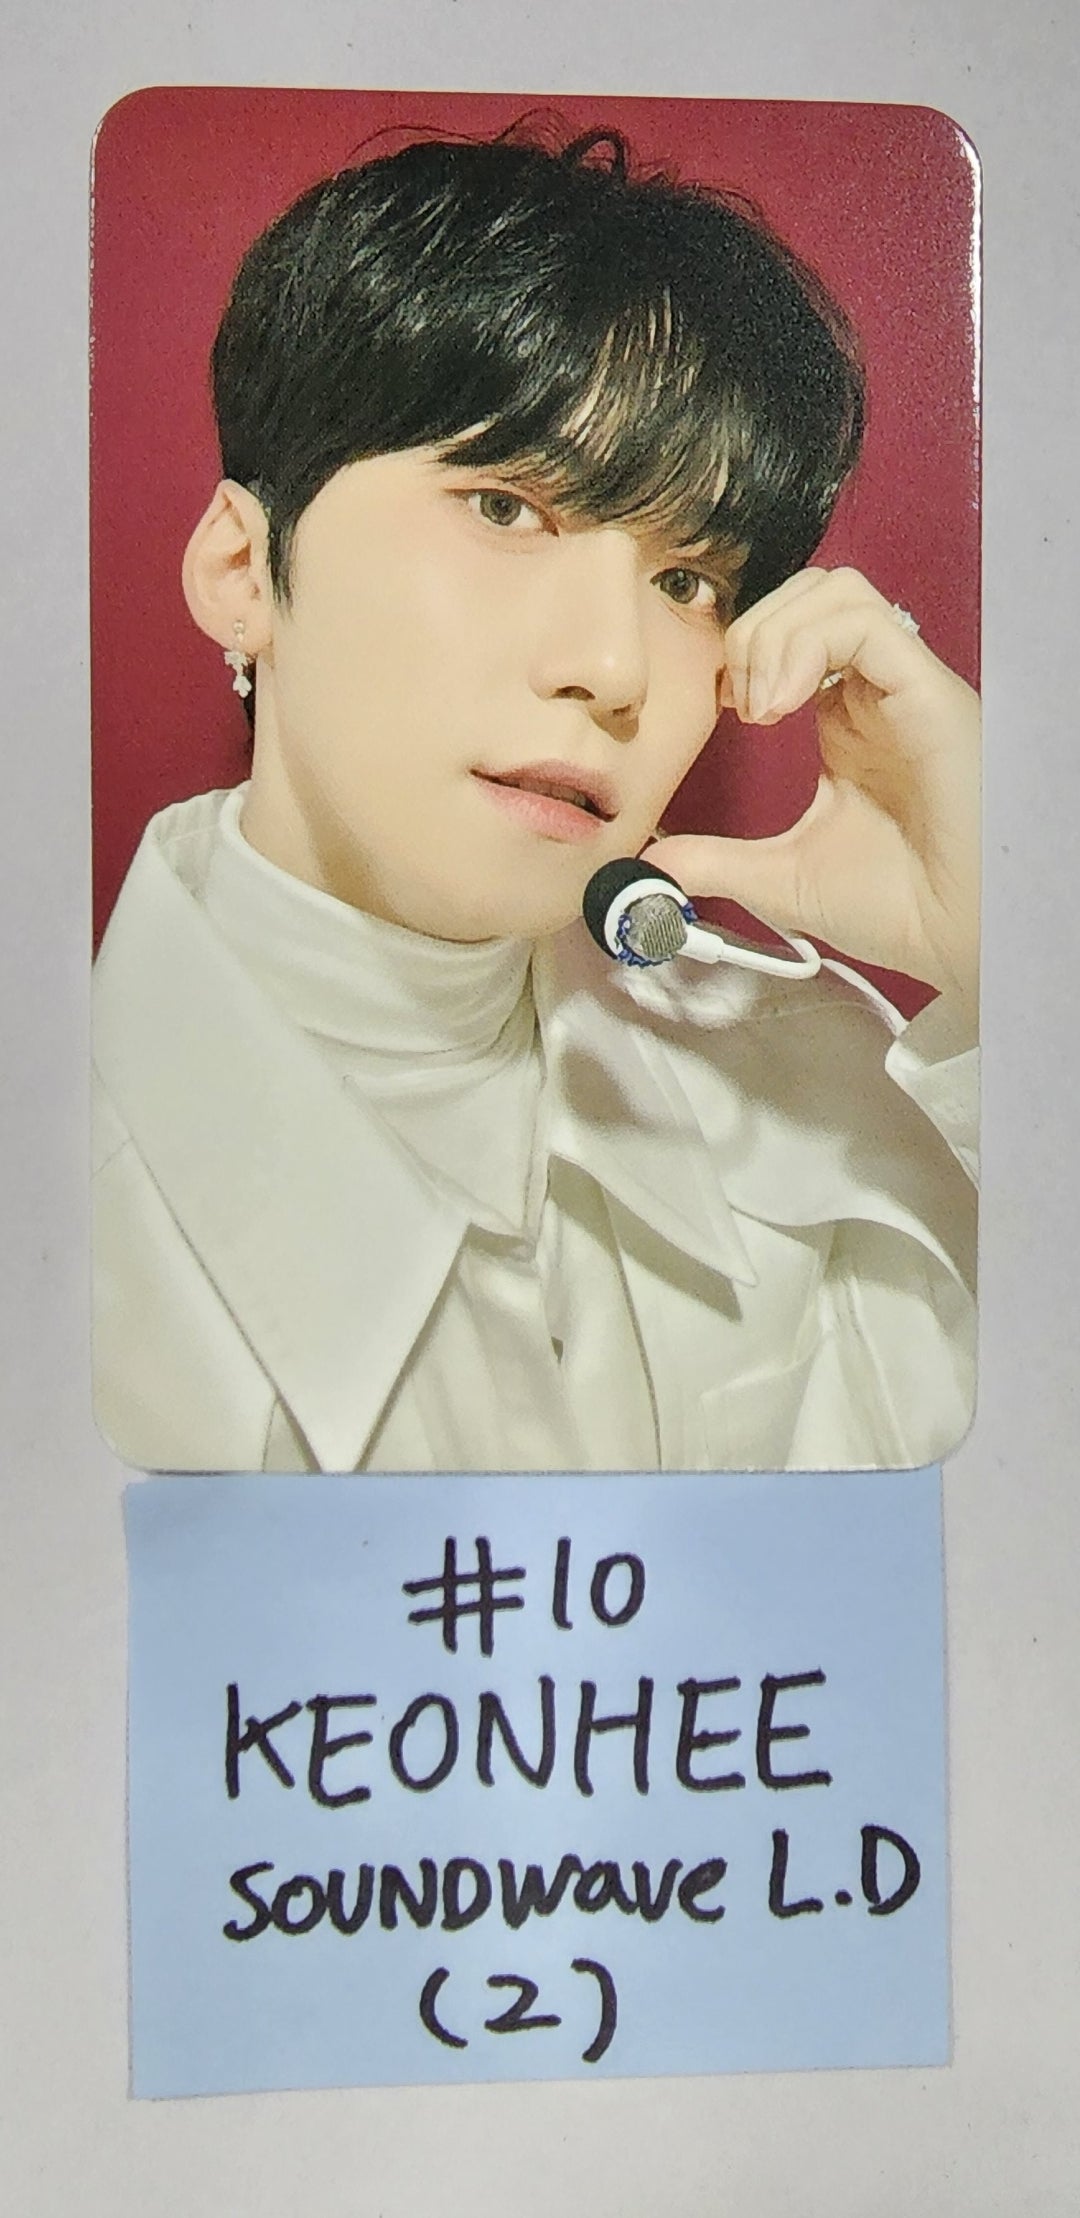 Oneus "MALUS" - Soundwave Lucky Draw Event Photocard Round 2